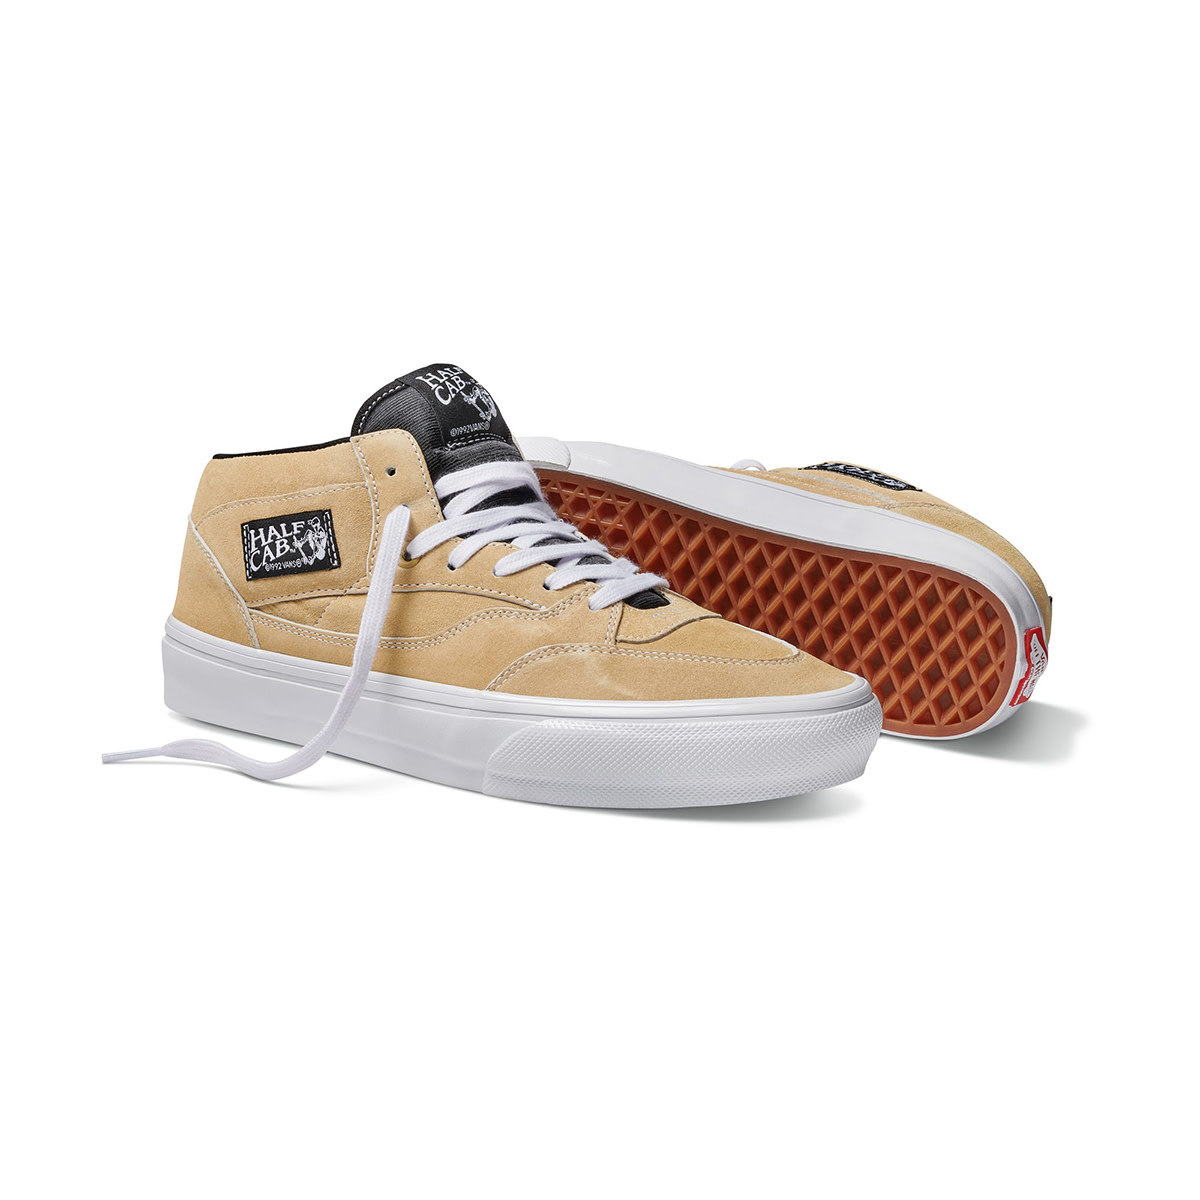 Vans Shoes Skate 30th Half Cab '92 Taupe/White